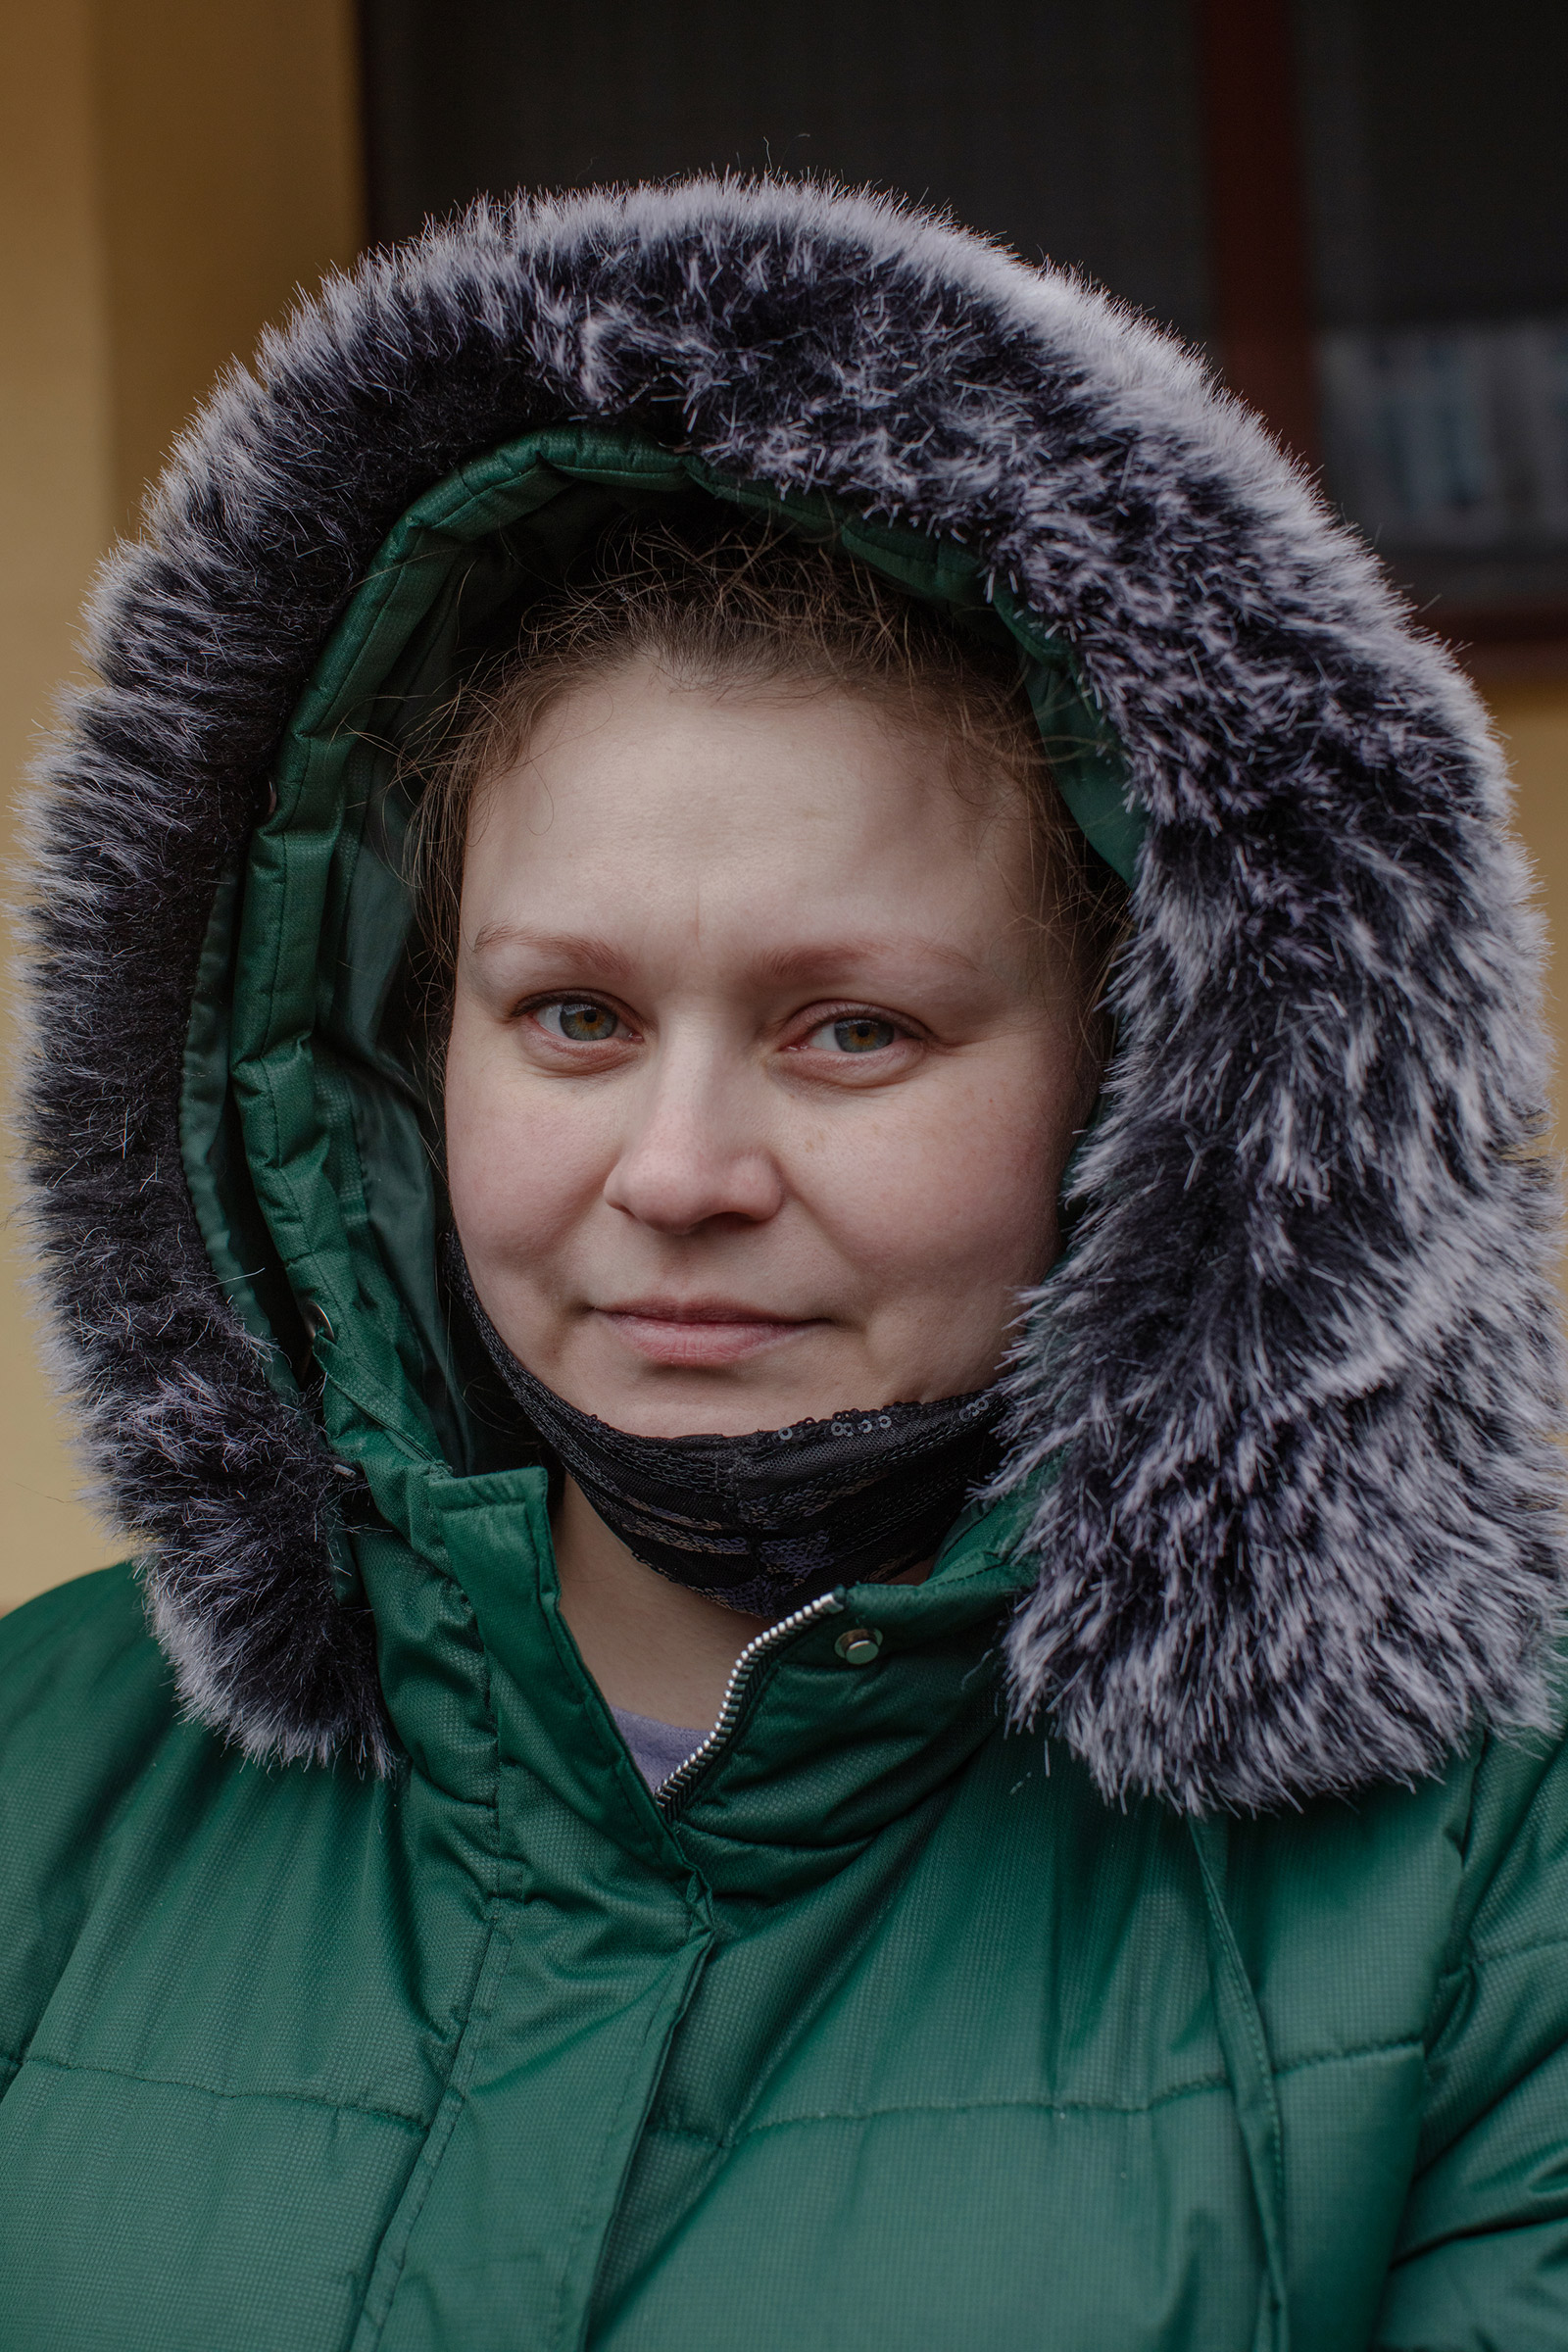 Abramosova, 35, at the train station in Przemysl, Poland. She works in an Amazon warehouse in Poland, sending money back home (Natalie Keyssar for TIME)